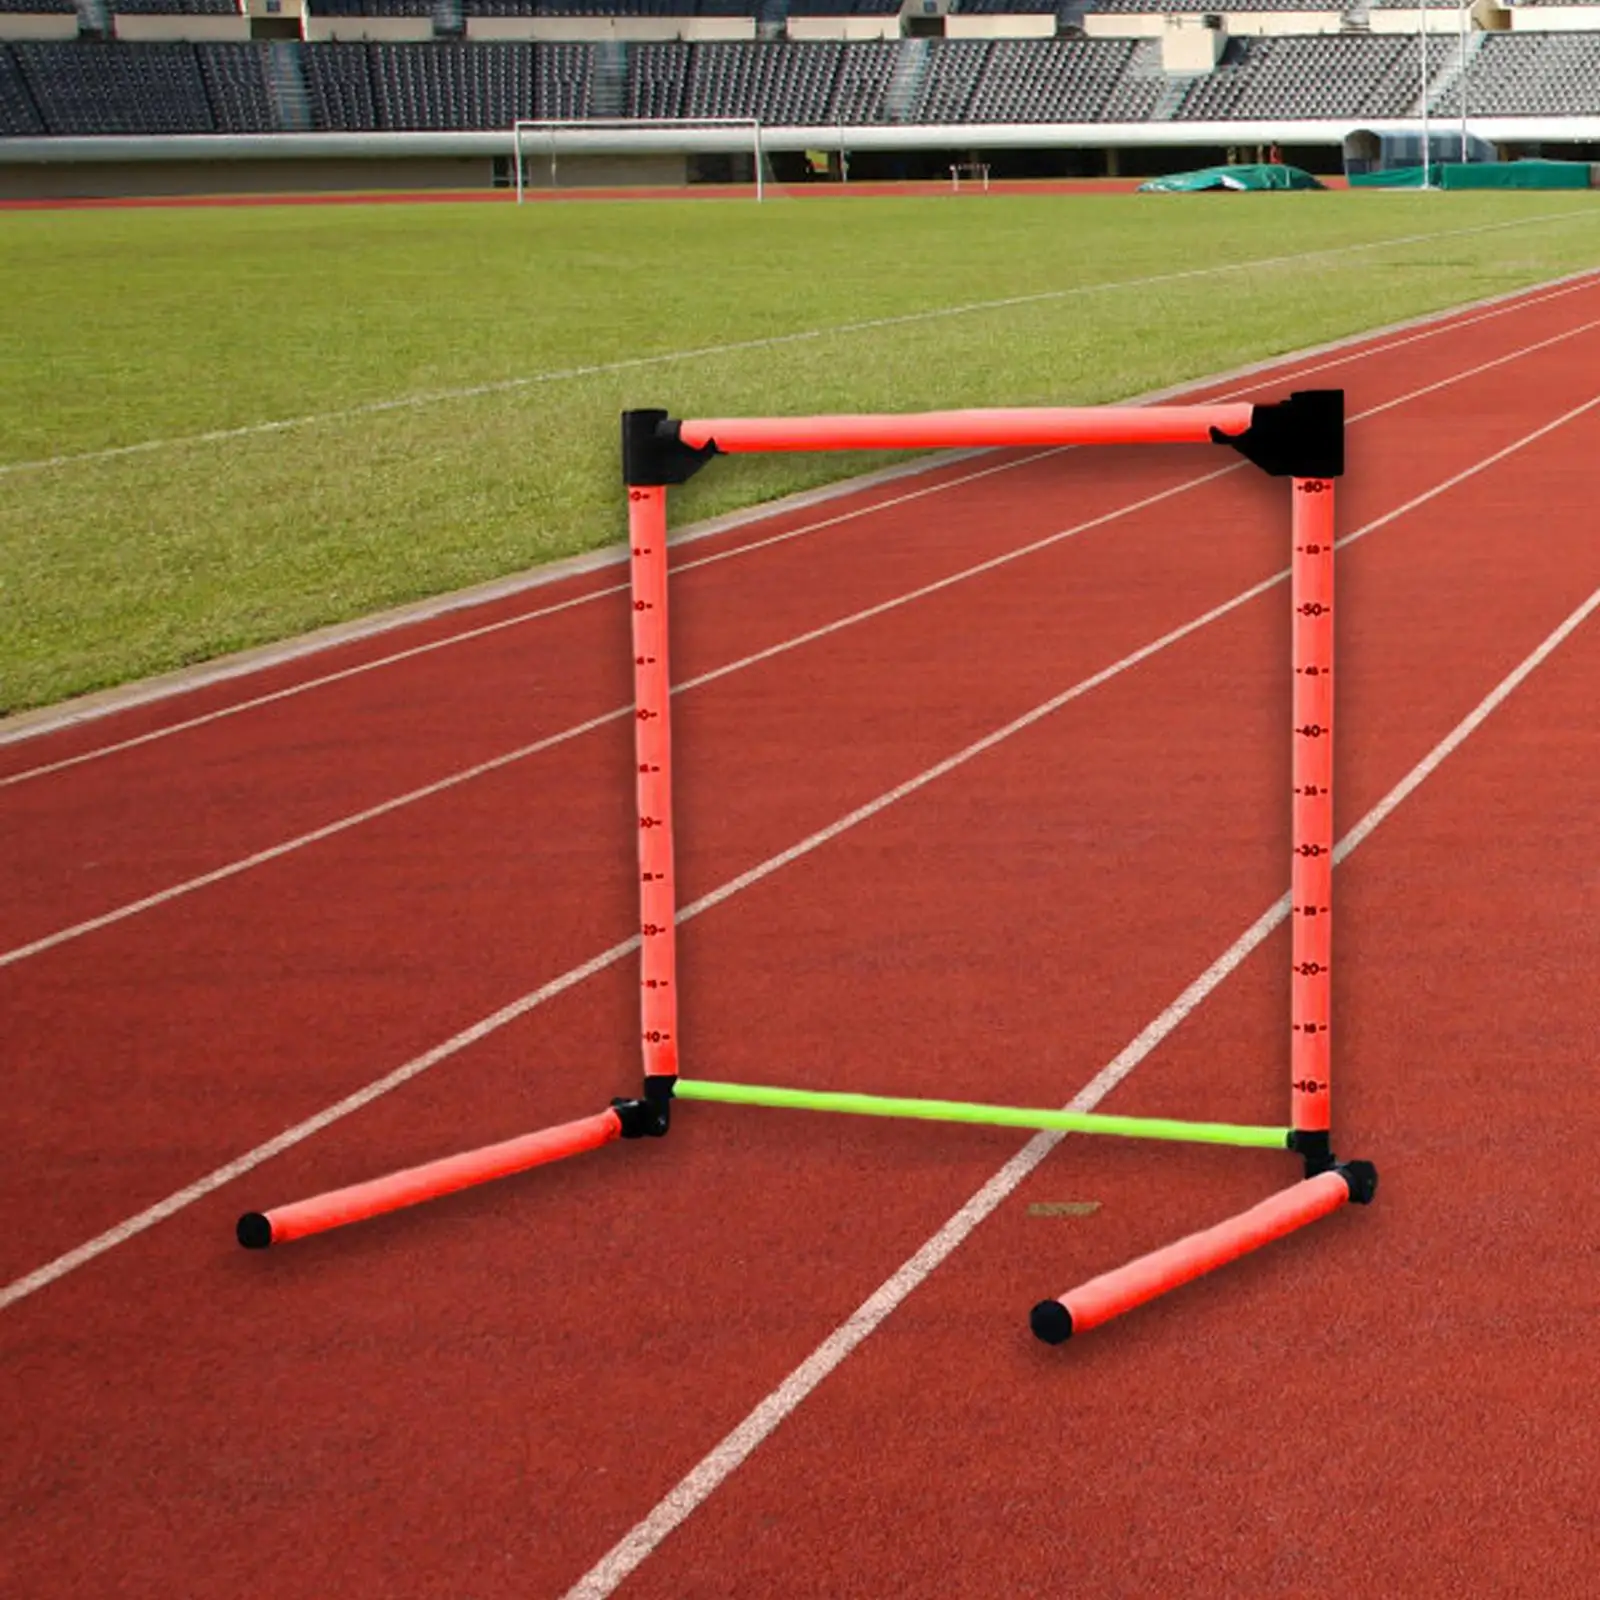 Agility Hurdles Track and Field Improves Coordination Adjustable Scale for Hurdle Training Soccer Football Athletes Racing